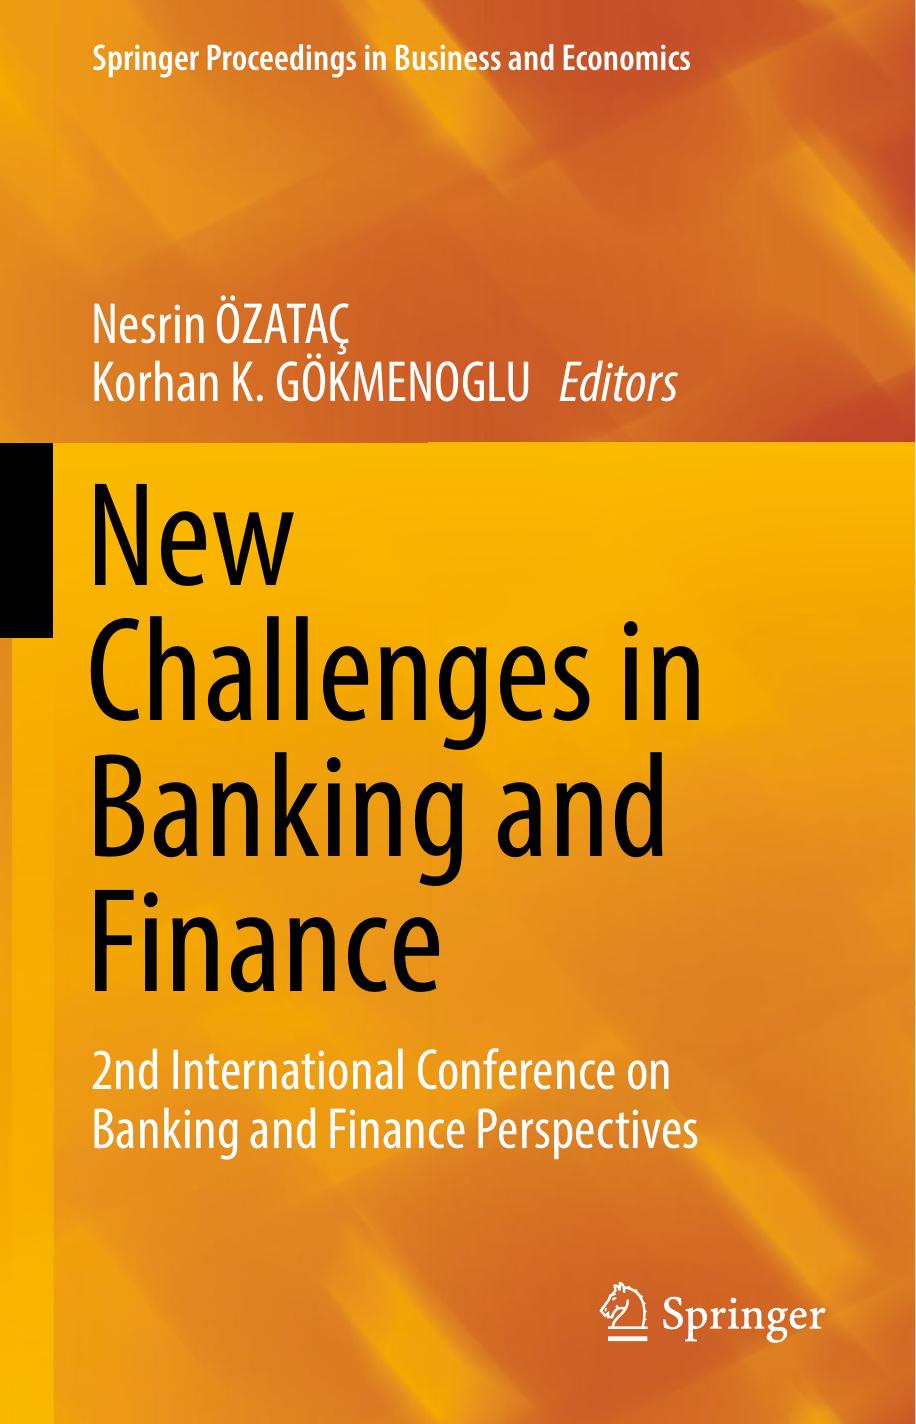 New Challenges in Banking and Finance 2017.pdf